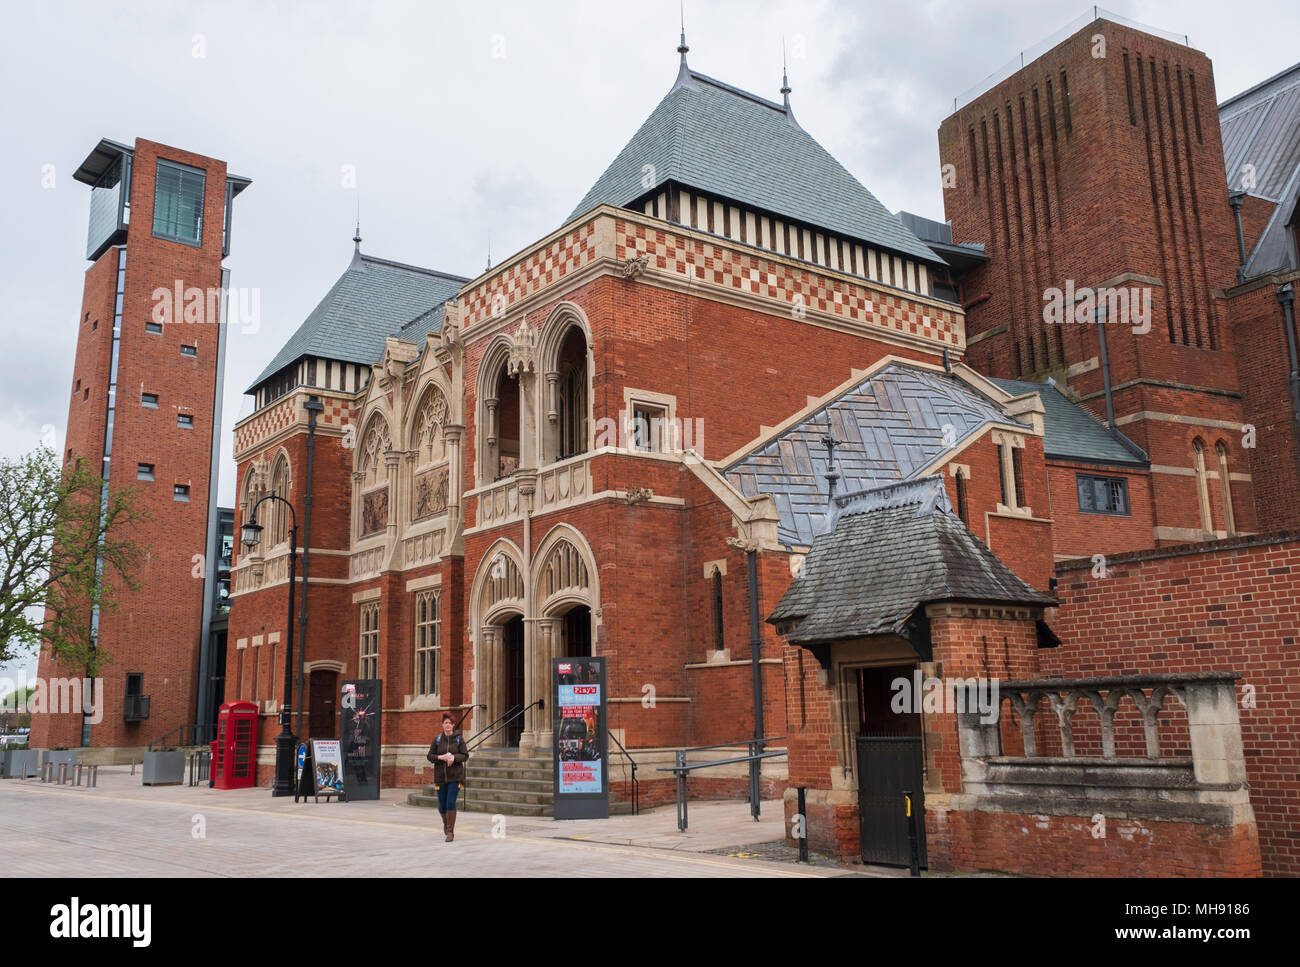 Exterior view of the famous Royal Shakespeare Theatre in Stratford upon Avon, Warwickshire, England. Stock Photo